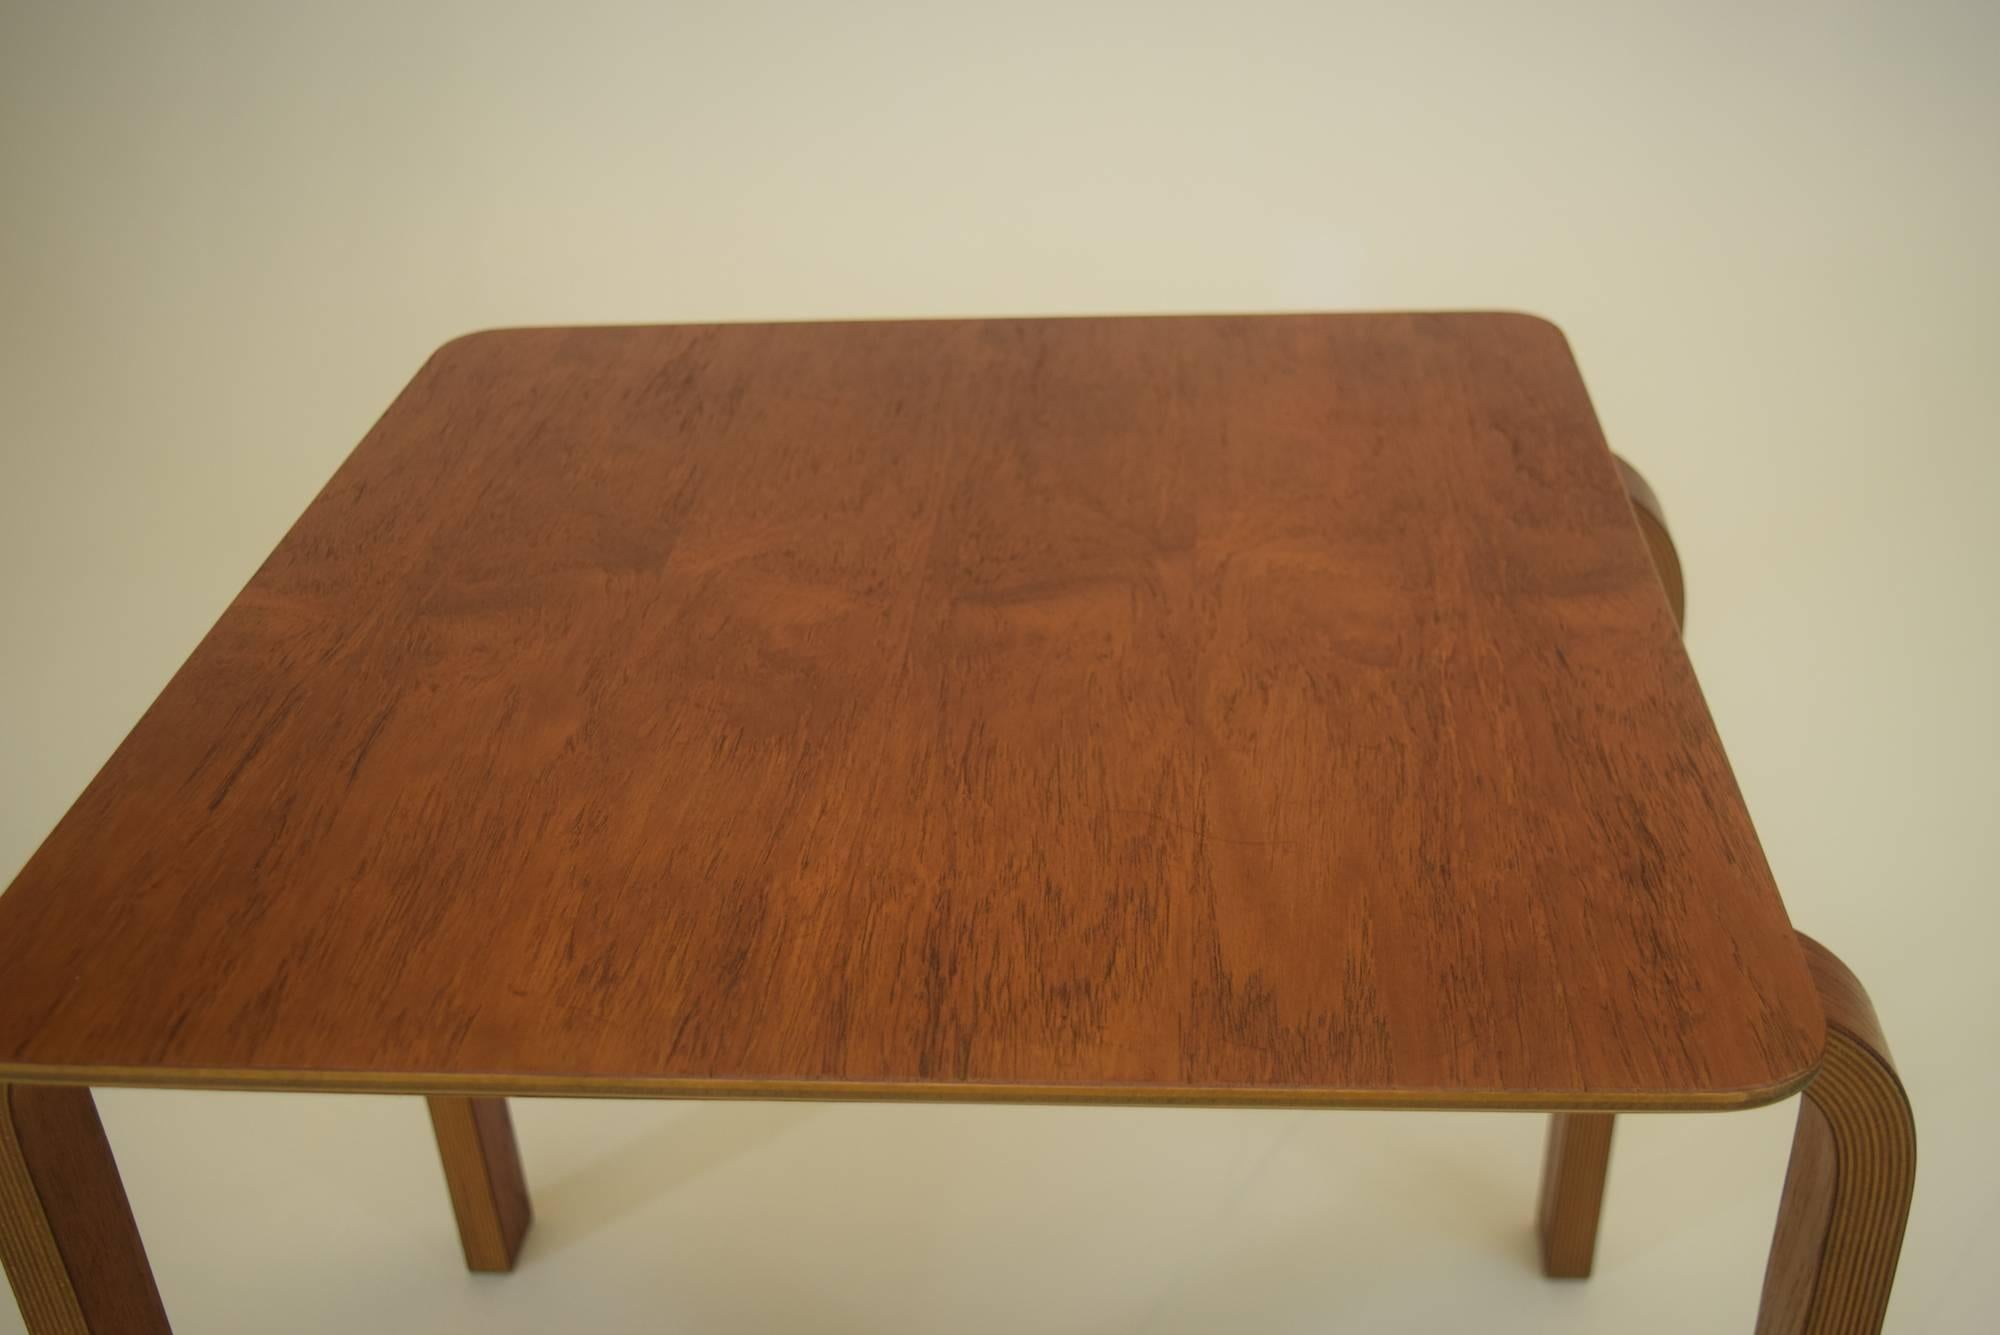 Scandinavian Modern Made in Denmark Occasional Table Teak and Plywood